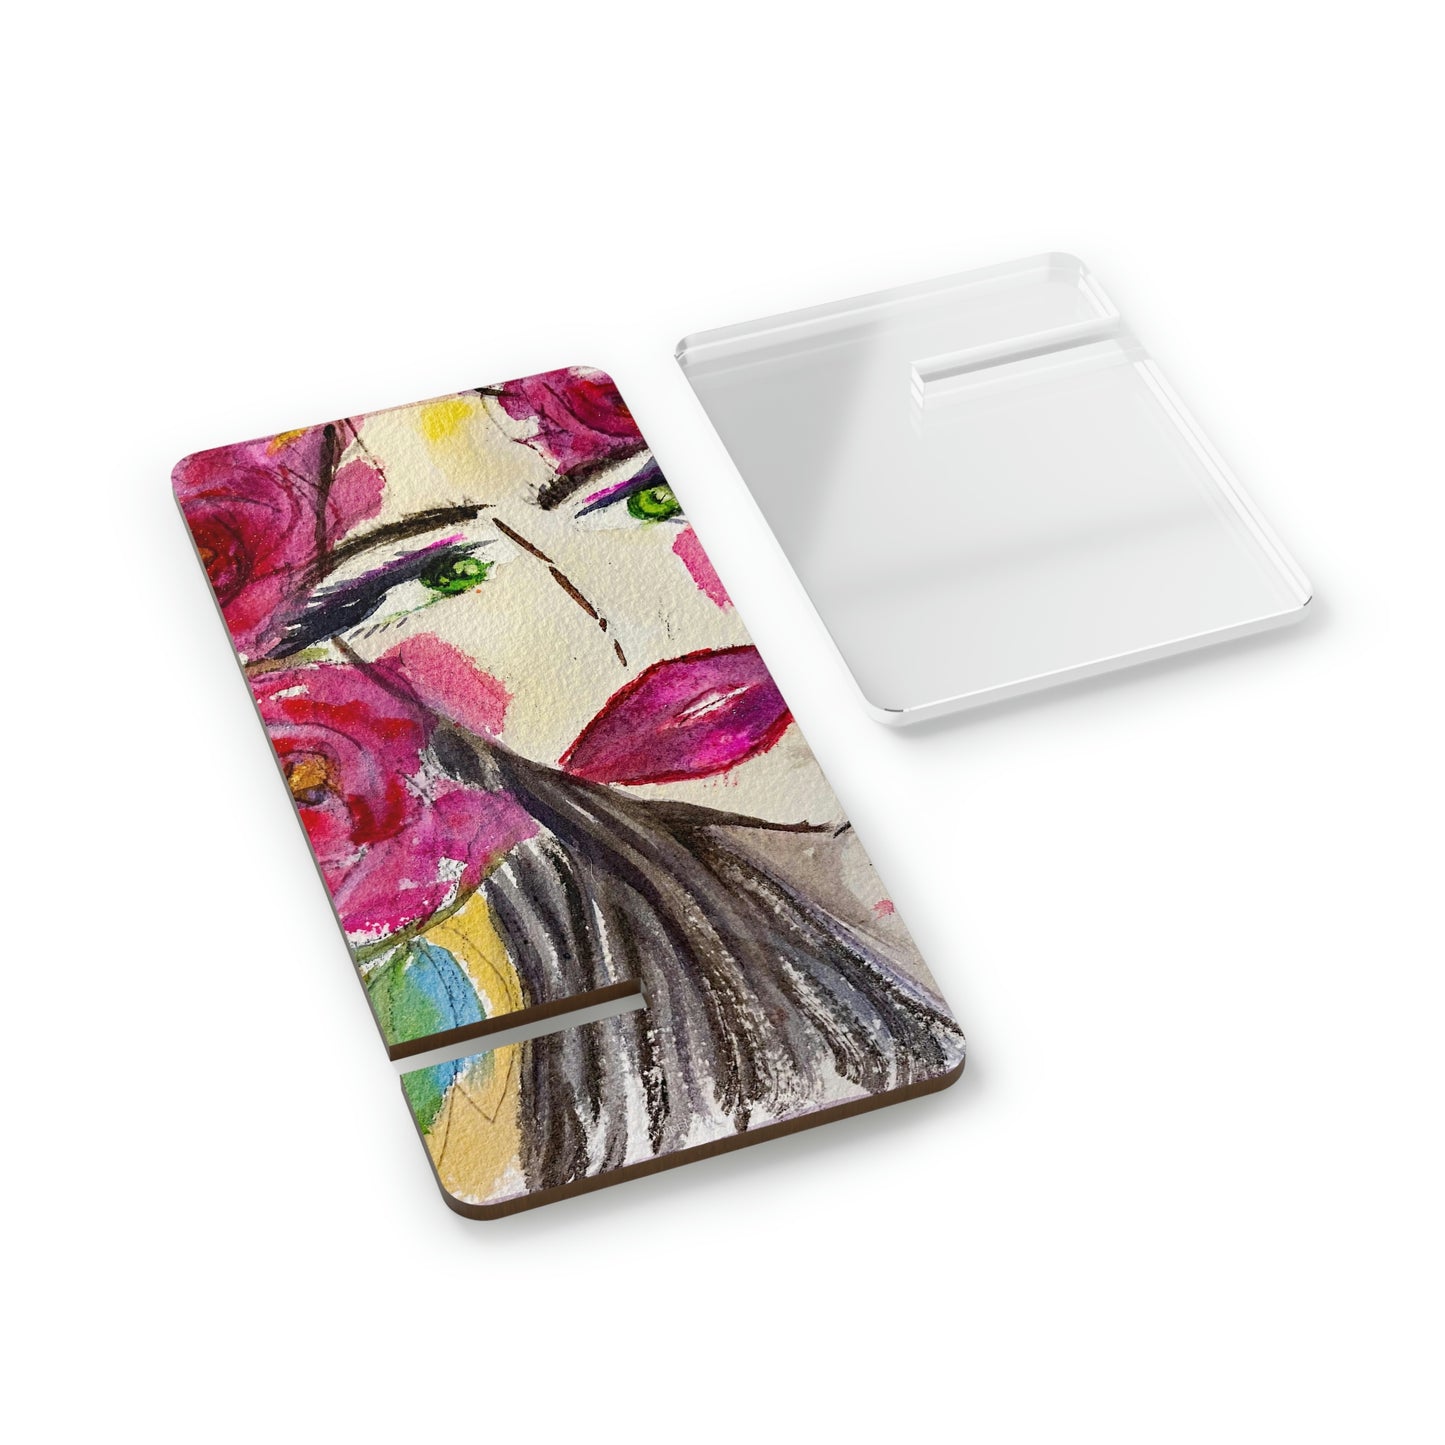 Brunette with Roses "uh-huh" Phone Stand